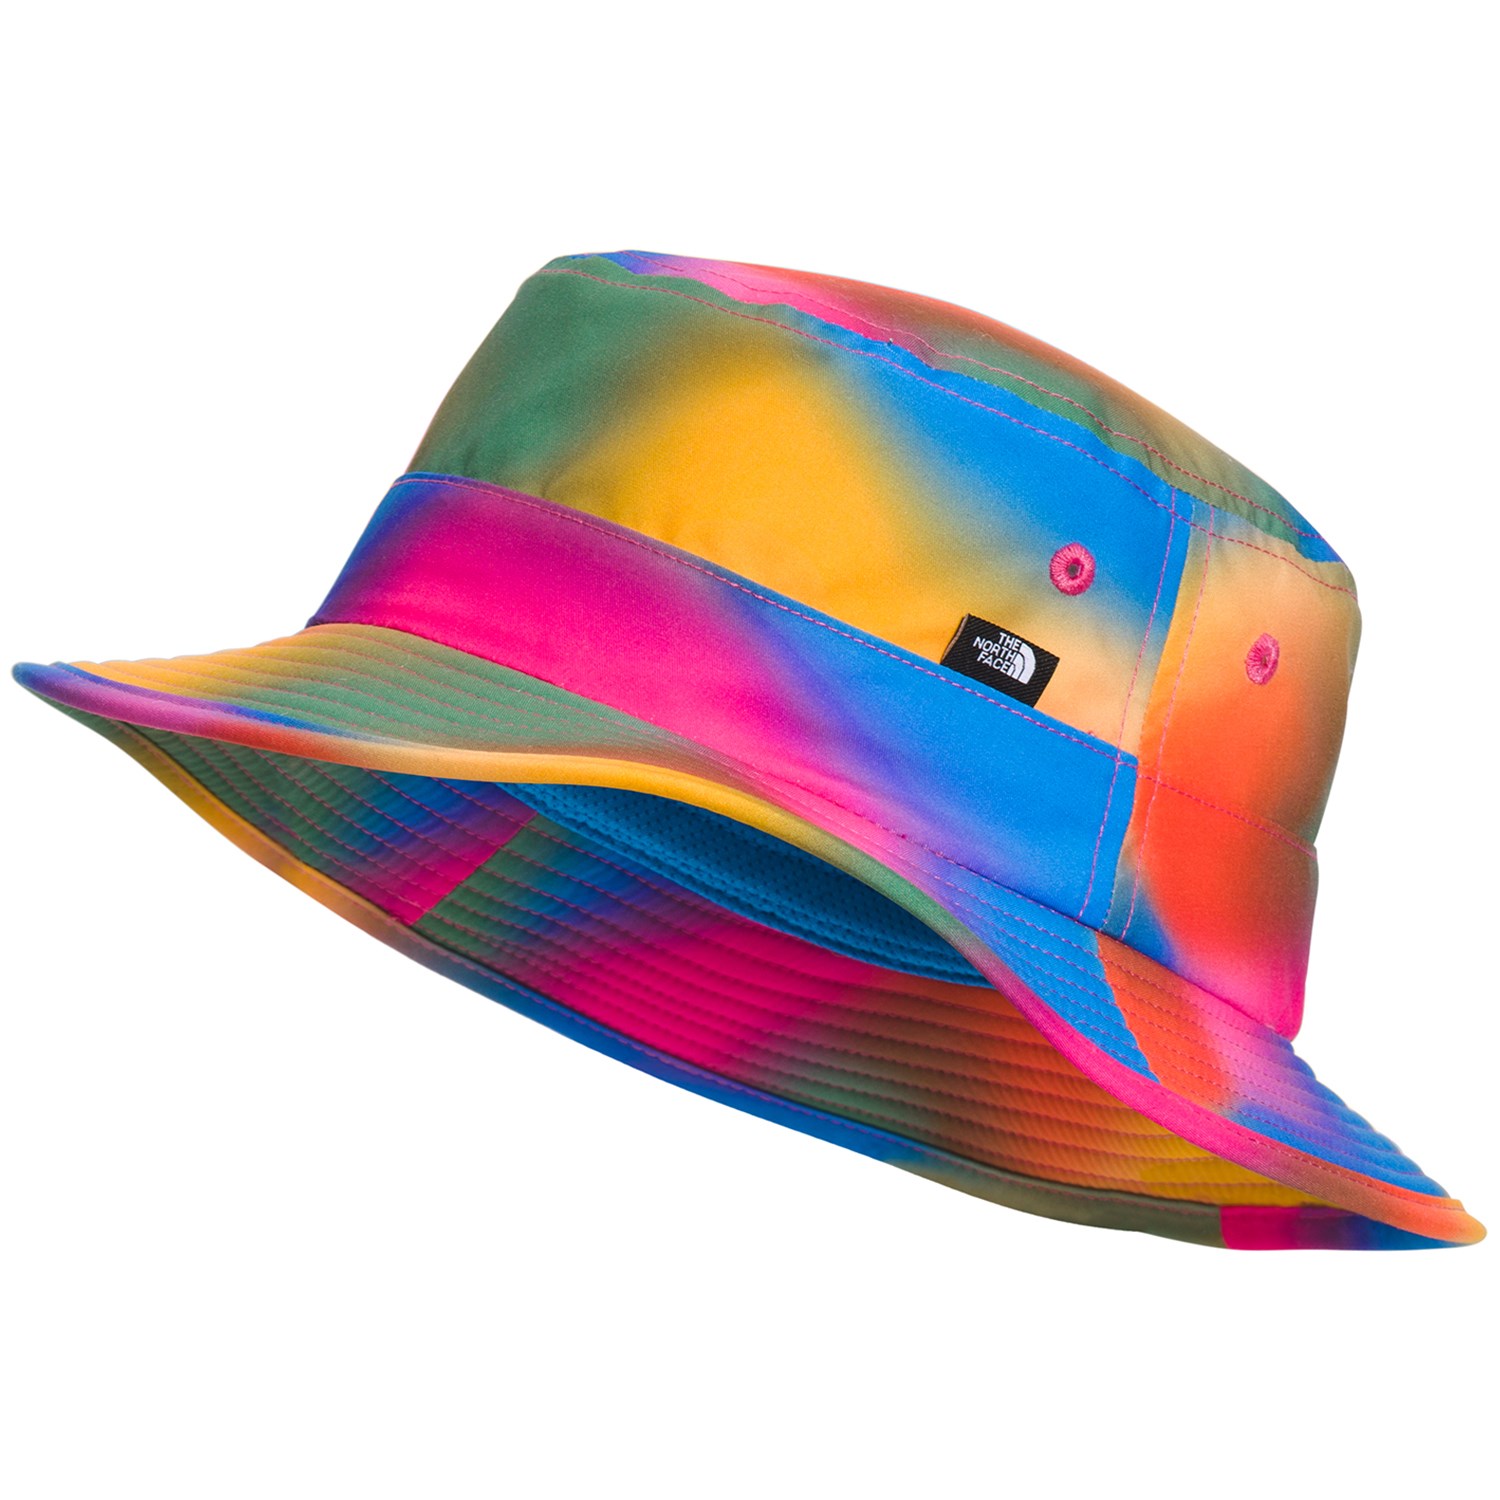 Kids' The North Face Class V Brimmer Bucket Hat